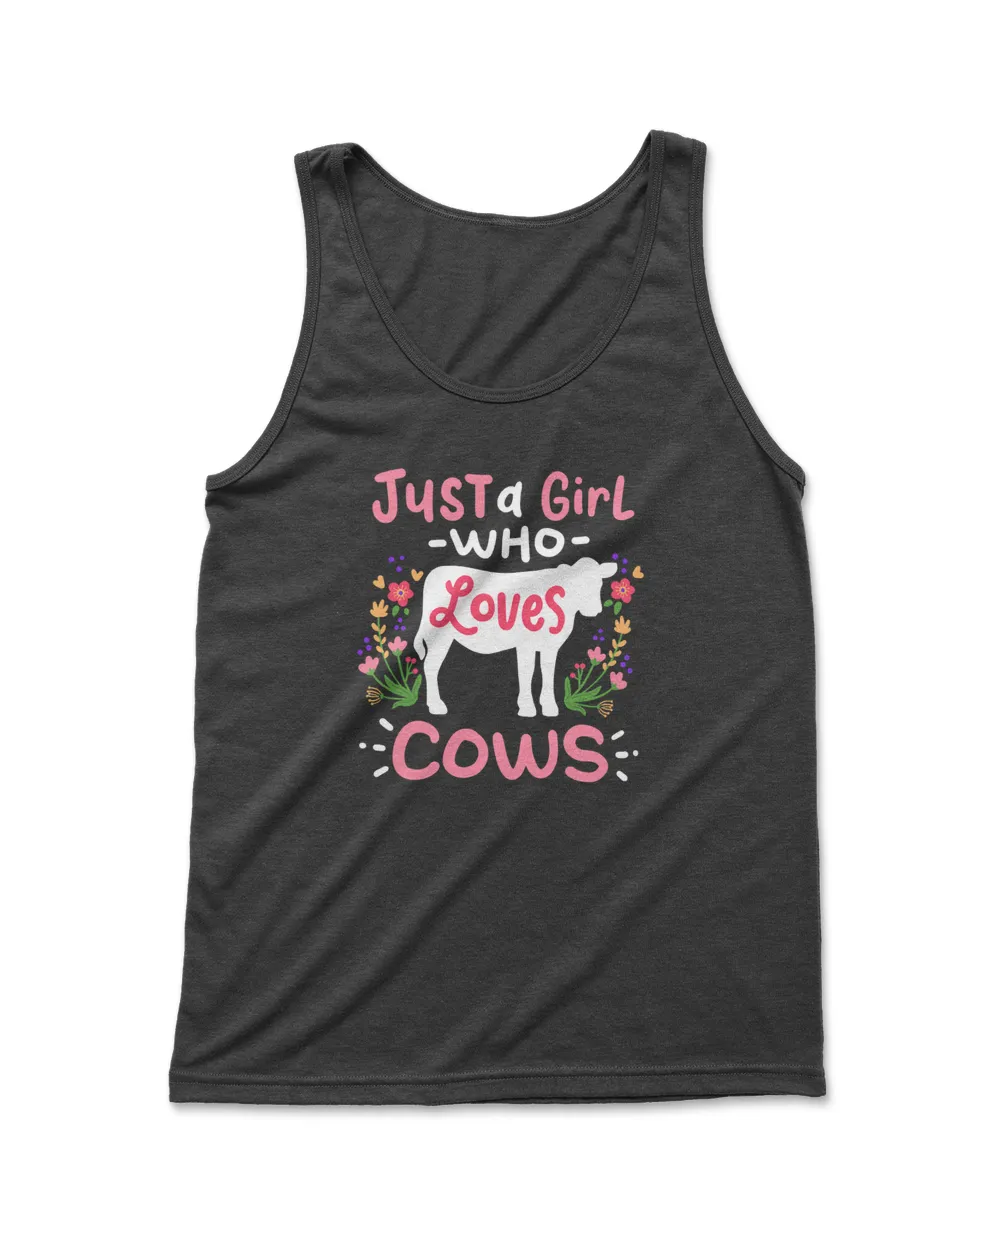 Cow Just A Girl Who Loves Cows Gift For Ranchers. T-Shirt